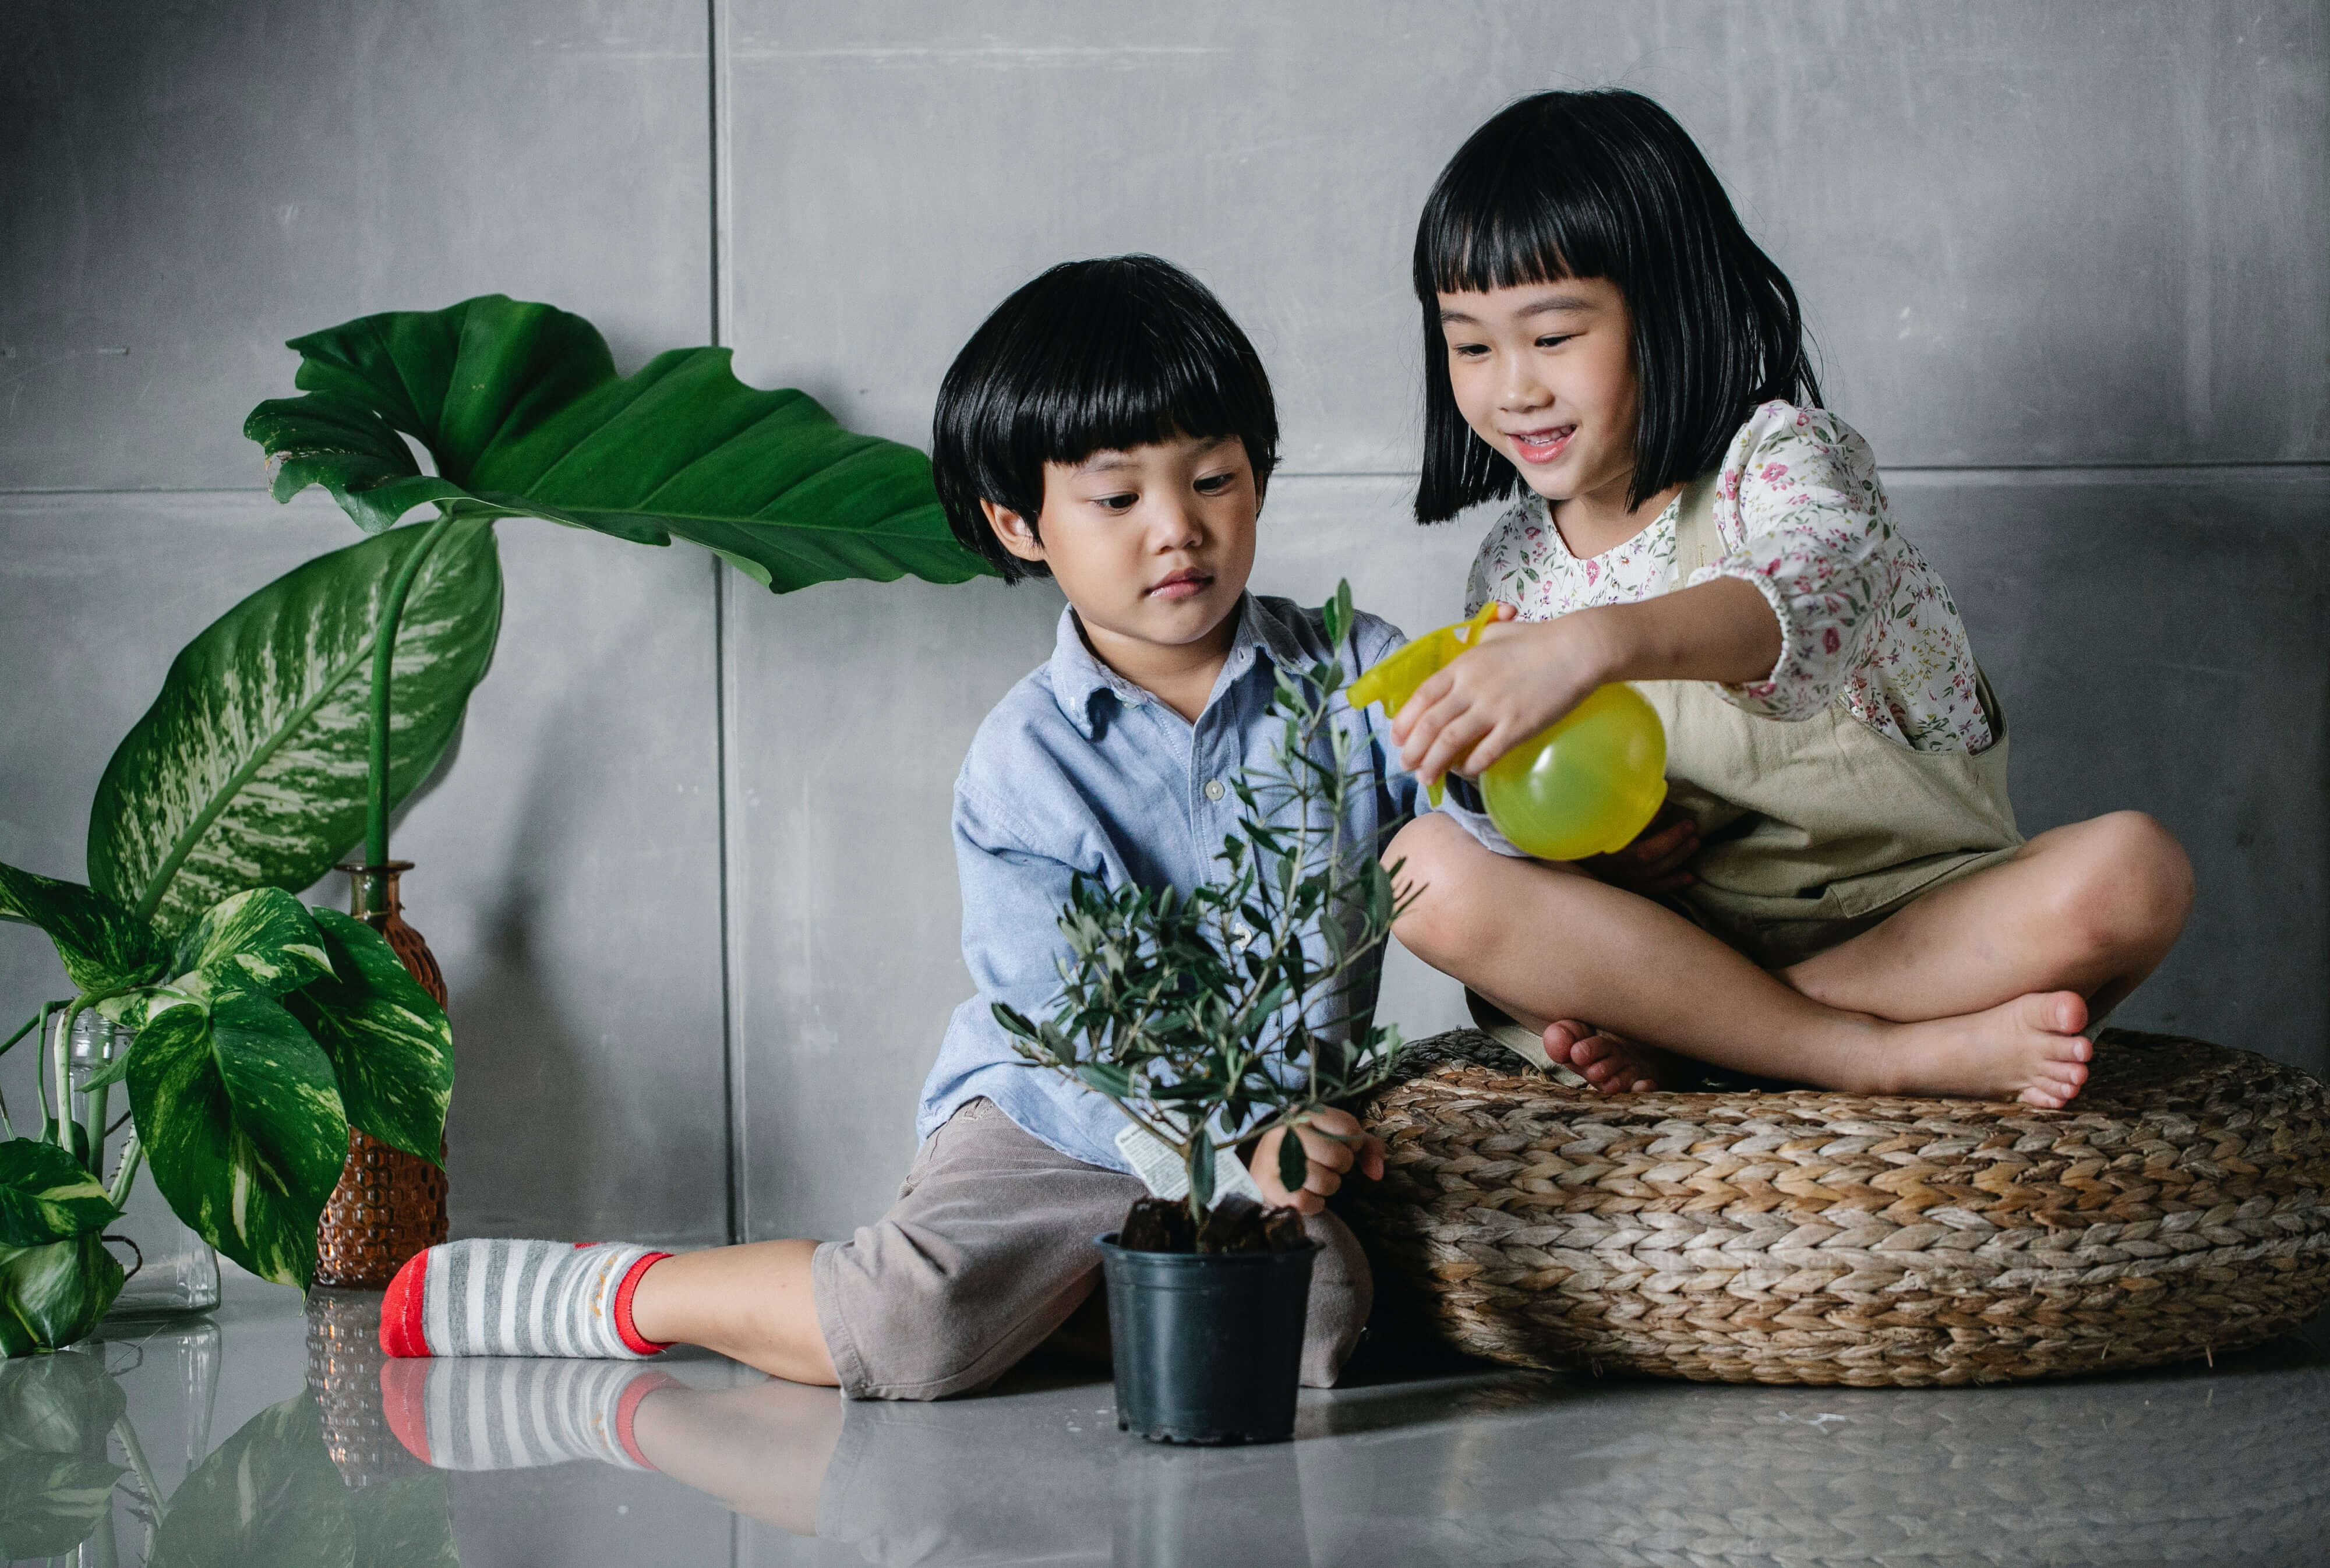 Asian kids growing a plant